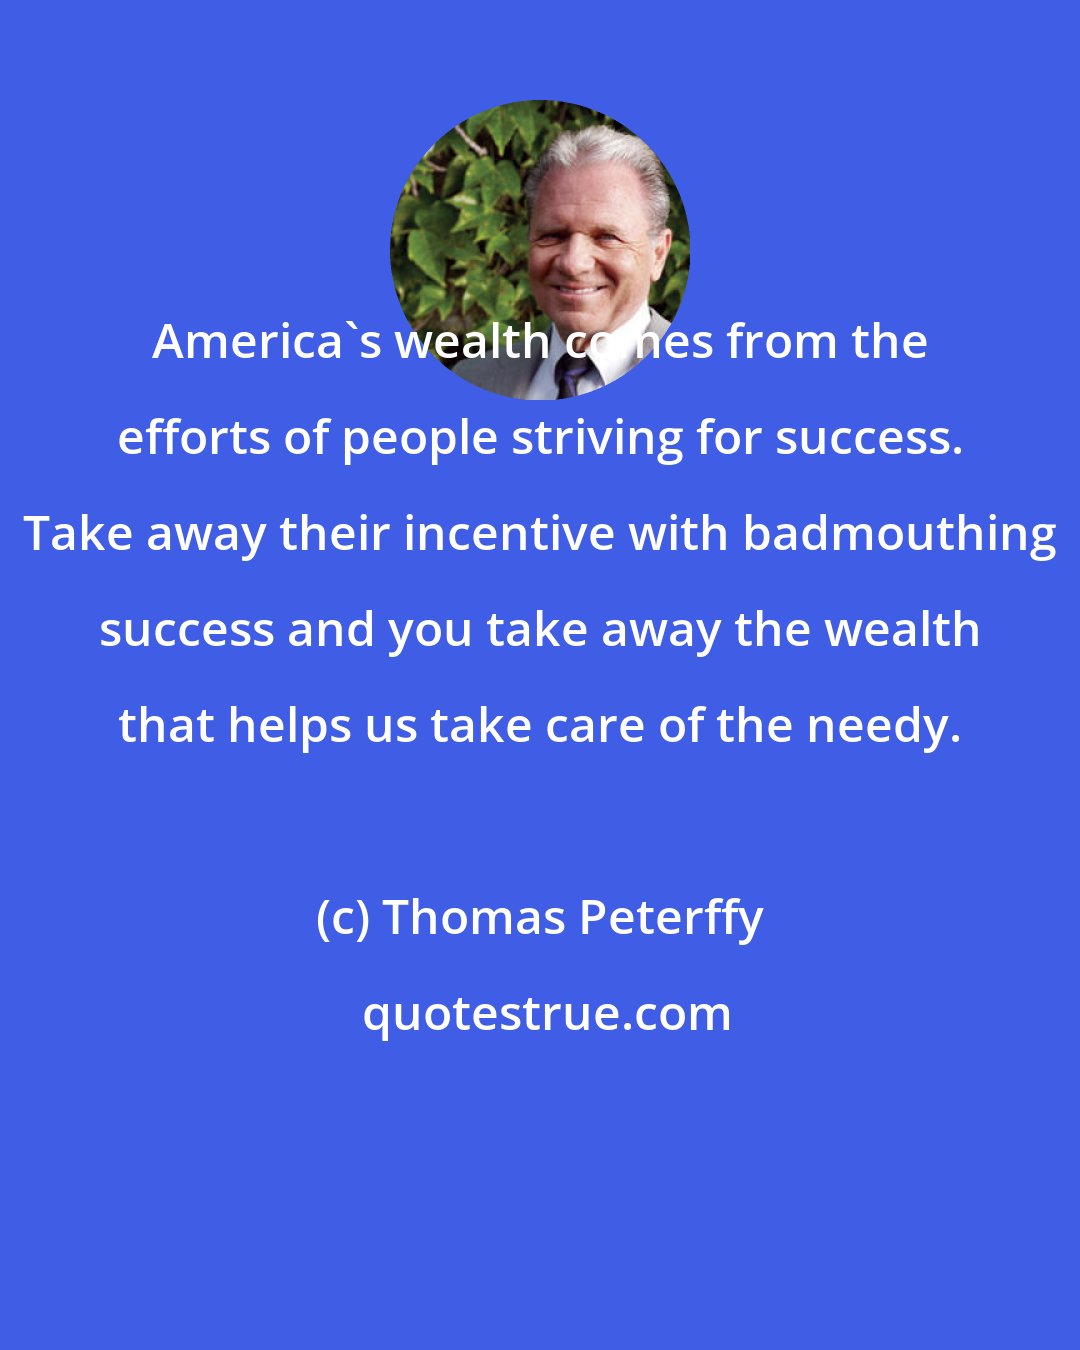 Thomas Peterffy: America's wealth comes from the efforts of people striving for success. Take away their incentive with badmouthing success and you take away the wealth that helps us take care of the needy.